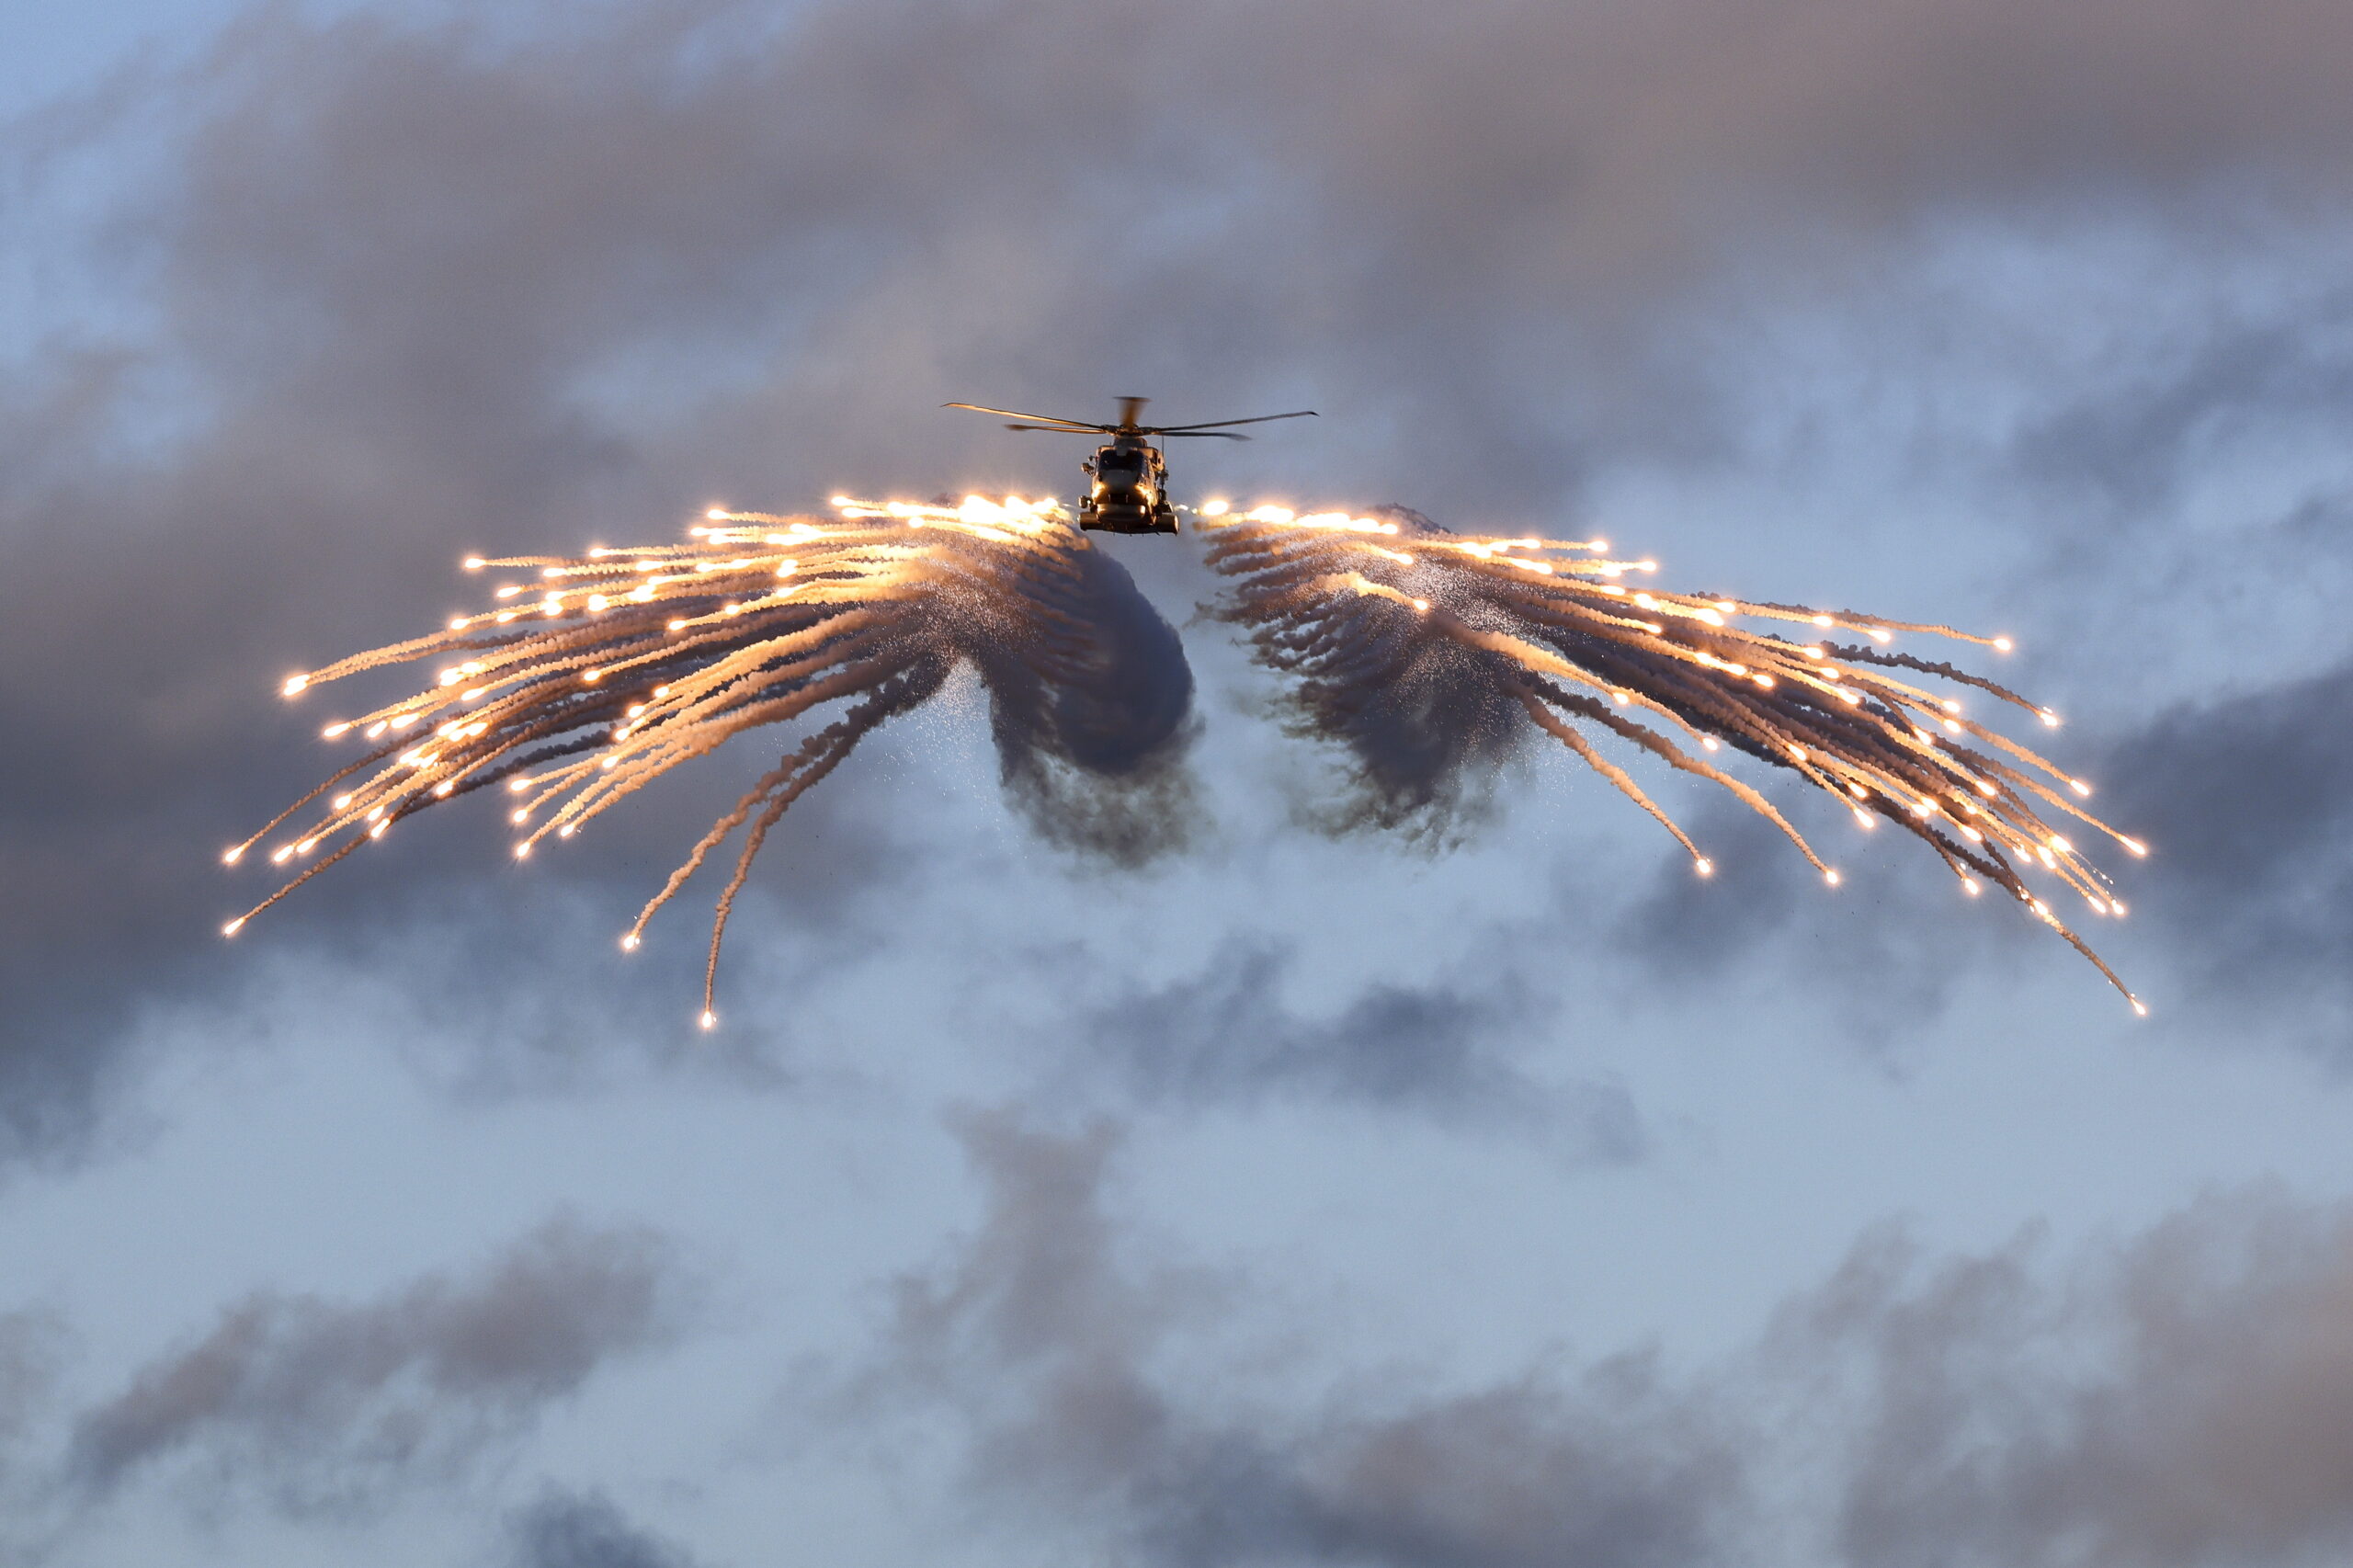 A Merlin helicopter from 820 Naval Air Squadron loaded and fired flares from HMS Prince of Wales, while embarked for Exercise Steadfast Defender. Flares are one element of the Defensive Aid Suite (DAS). The flares make up one portion of the DAS system, they are specifically designed to defeat Infra-Red seeking missiles (MANPADS). The aircraft carrier is taking part in Exercise Steadfast Defender. Exercise STEADFAST DEFENDER 2024 will be the largest NATO exercise in decades. NATO forces will be exercising across multiple regions and in multiple domains (maritime, land, air, space, and cyber). The vast scale of this exercise will occur over several months and over thousands of kilometres and will involve tens-of-thousands of Allied troops, all showcasing NATO capabilities to deter adversaries and defend allied territory.